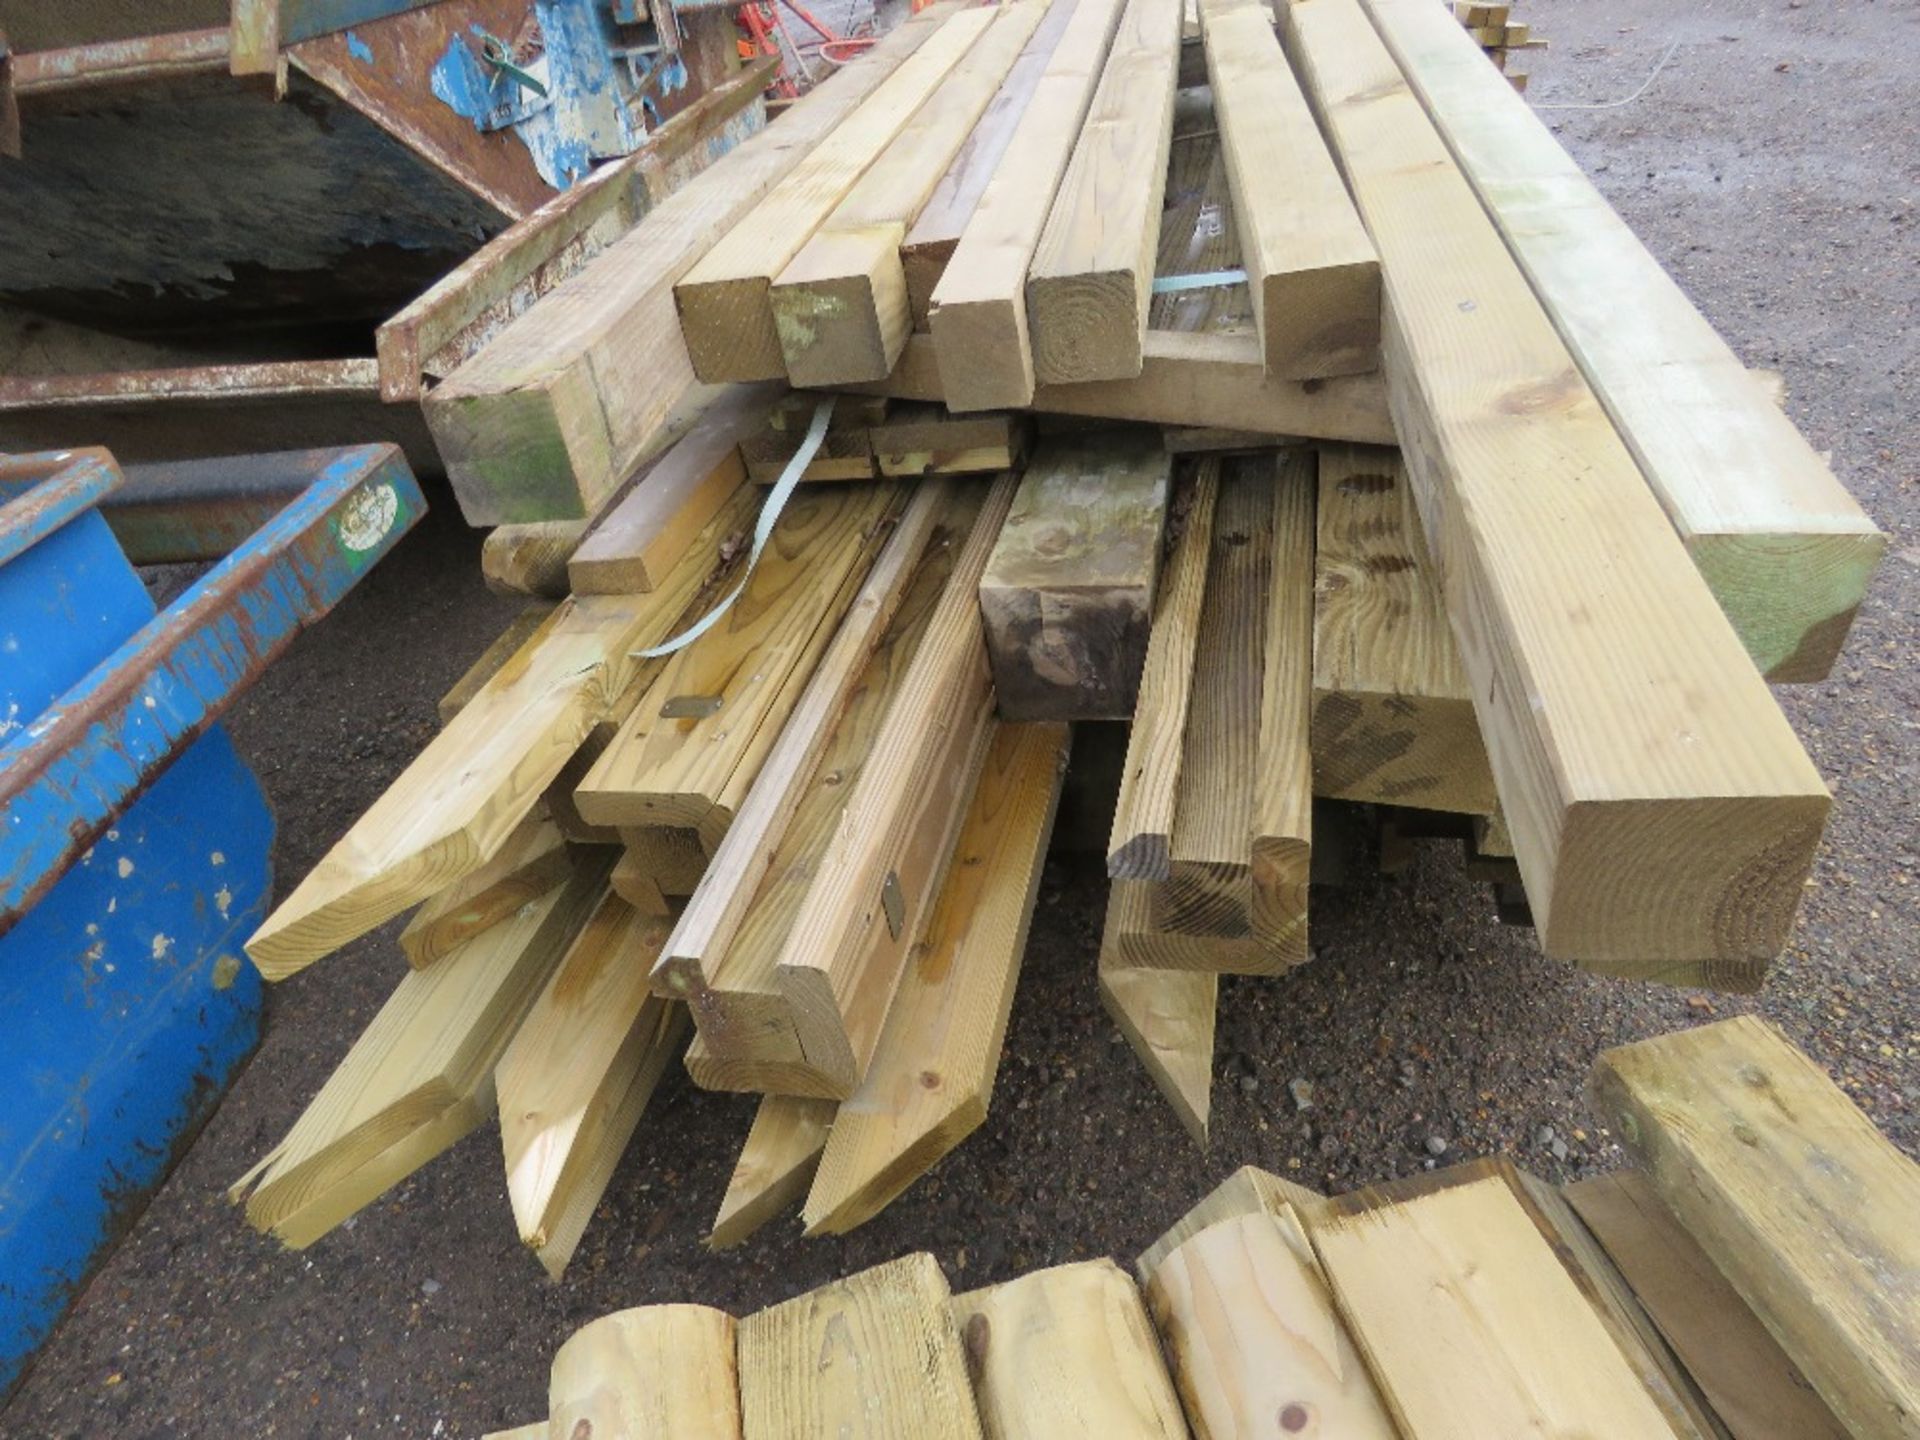 BUNDLE OF HEAVY DUTY TIMBERS AND POSTS 6-9FT LENGTH APPROX. - Image 3 of 4